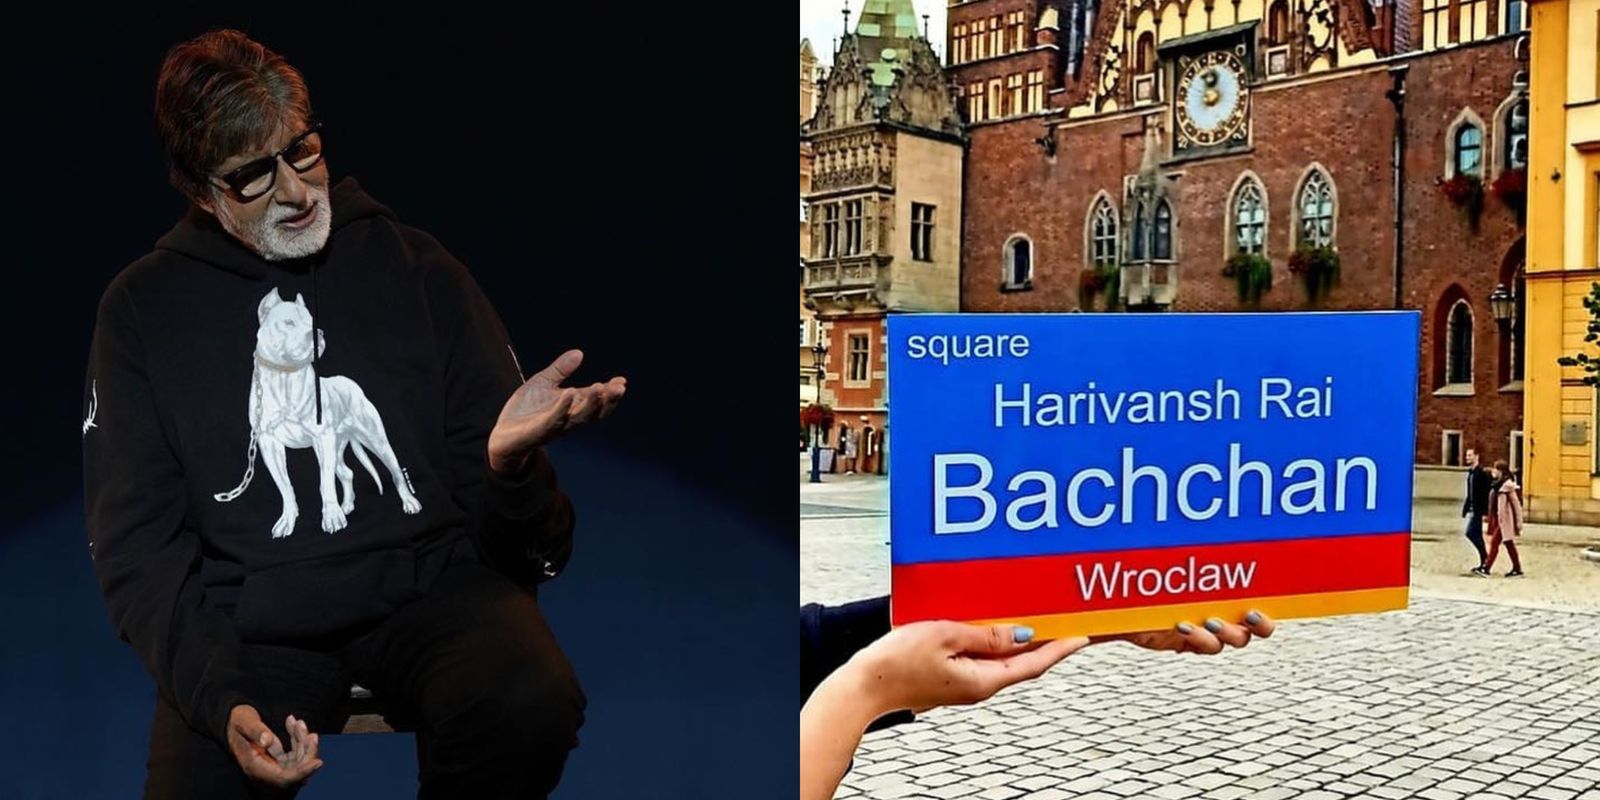 A Square In Poland Named After Amitabh Bachchan's Father Harivansh Rai Bachchan, Actor Calls It 'A Moment Of Extreme Pride'